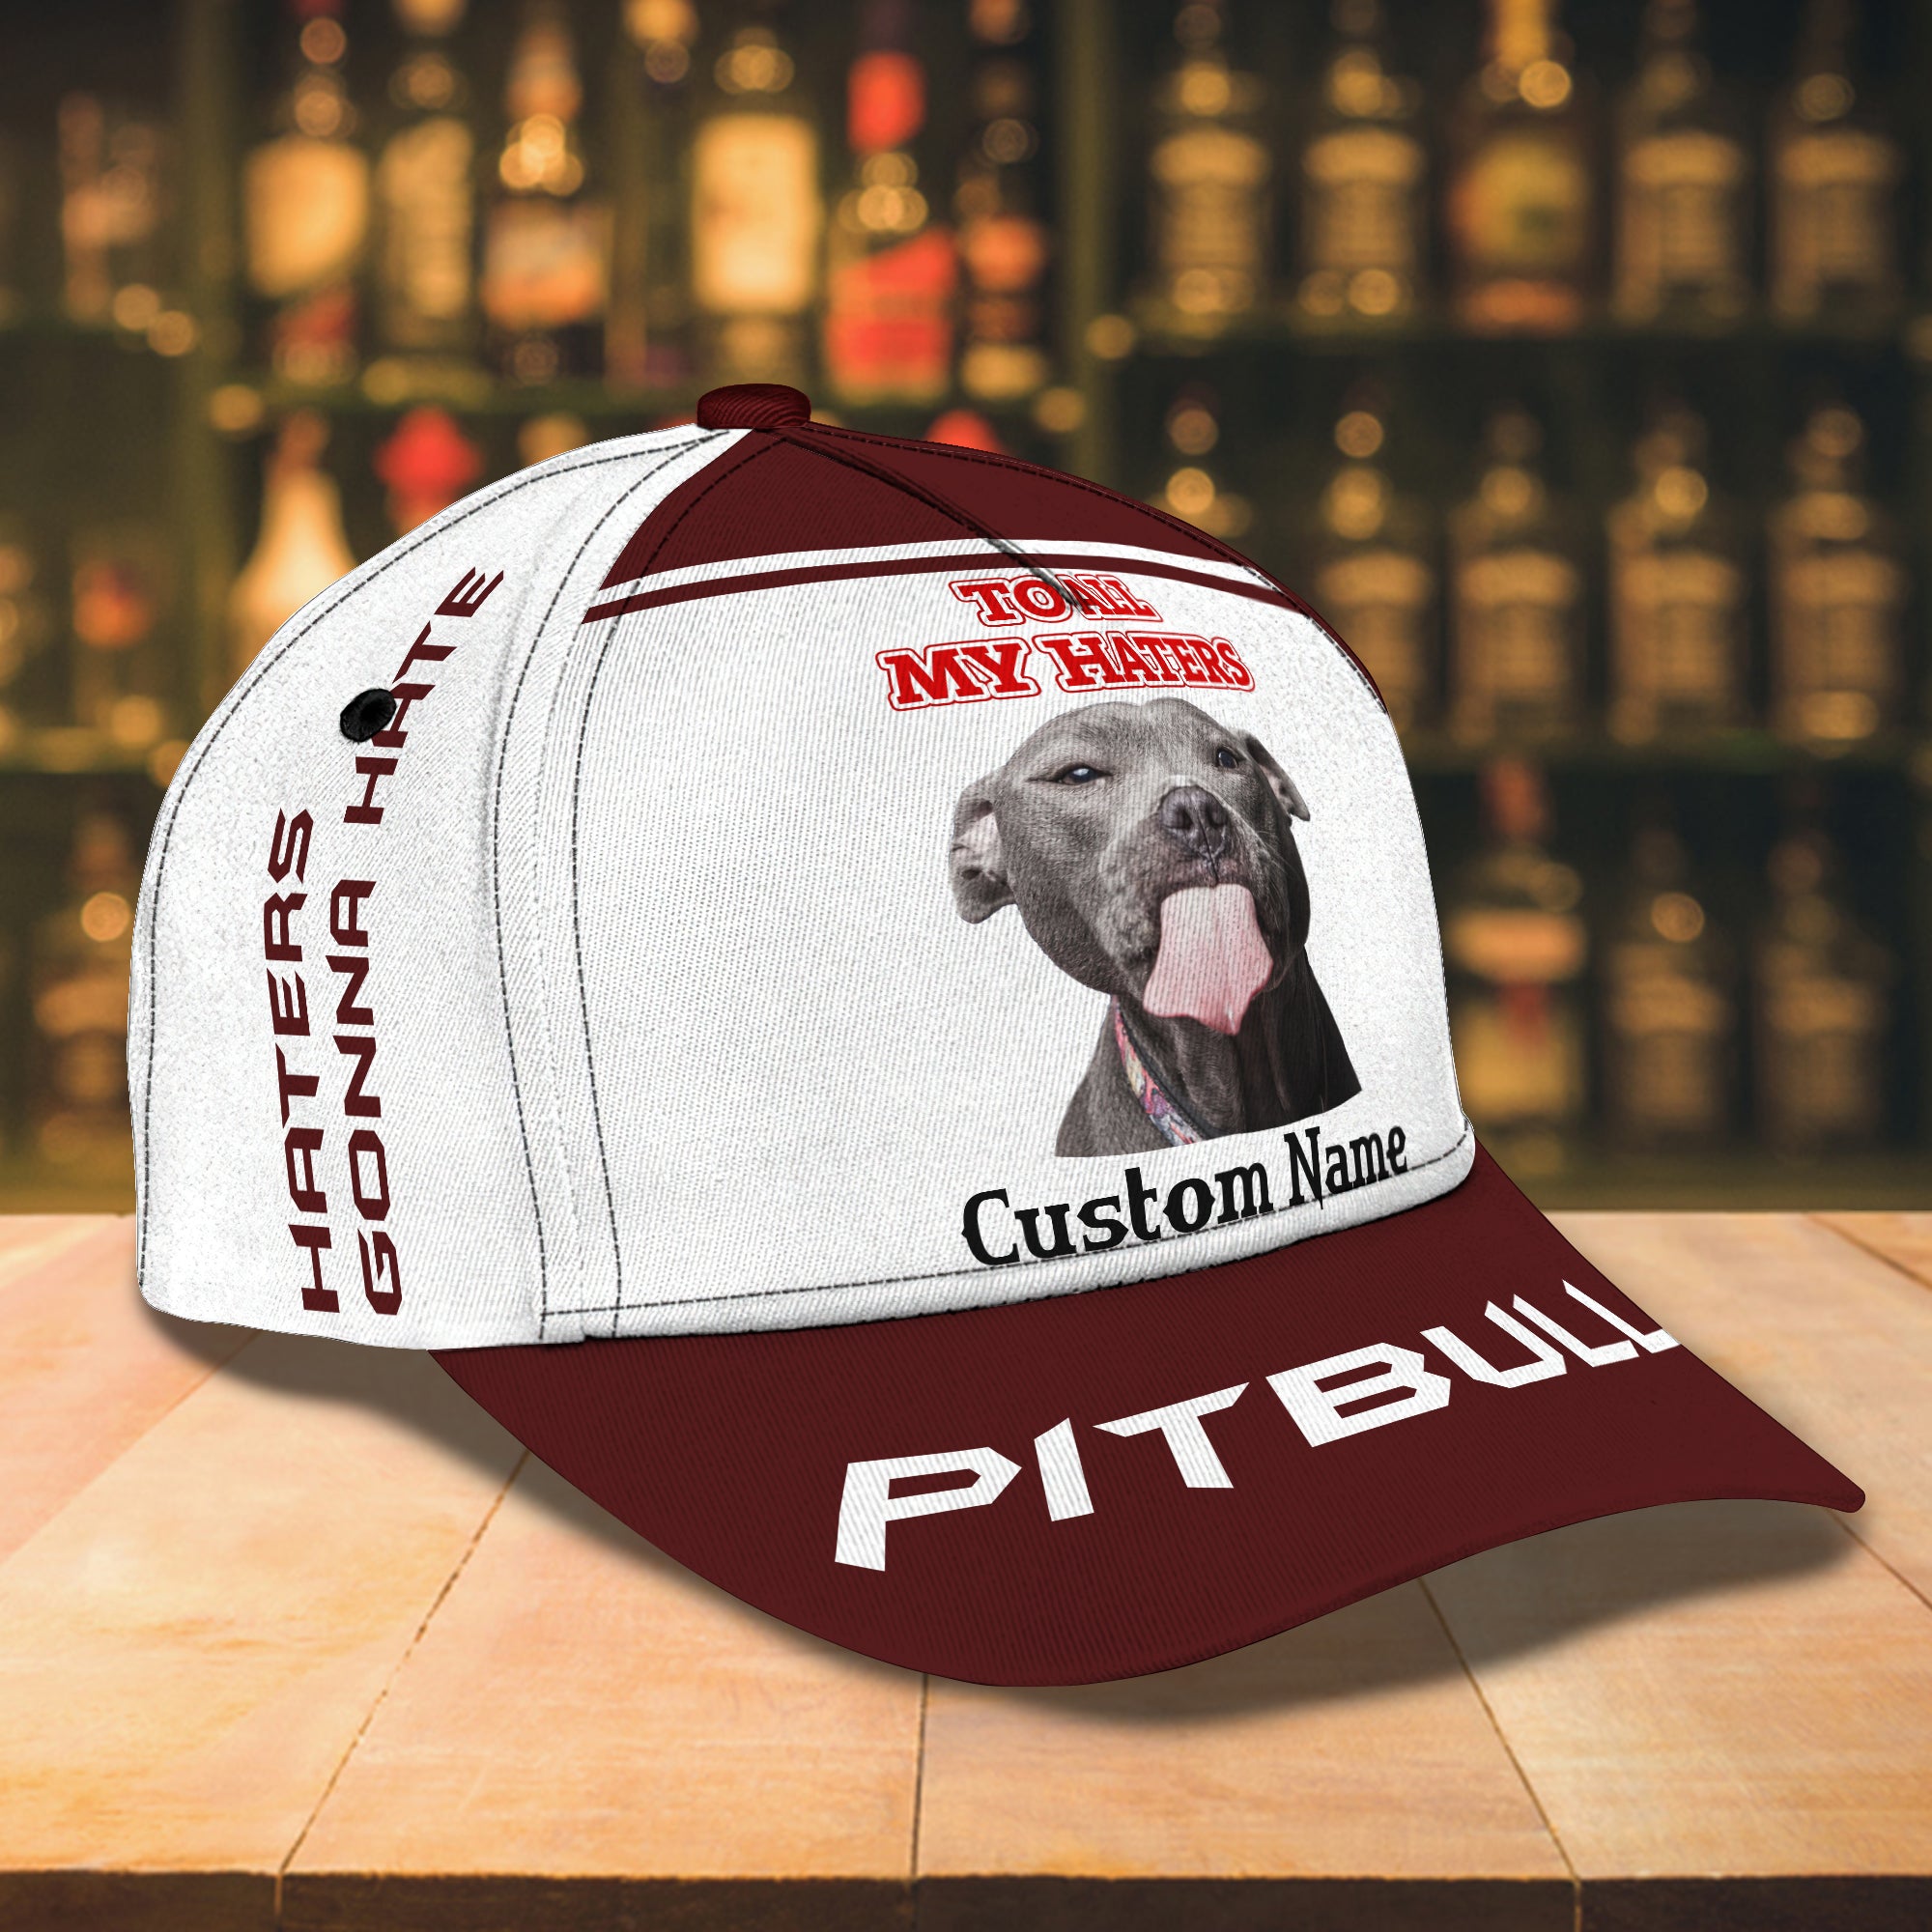 To All My Haters -Pitbull - Personalized Name Cap -Loop- T2k -145